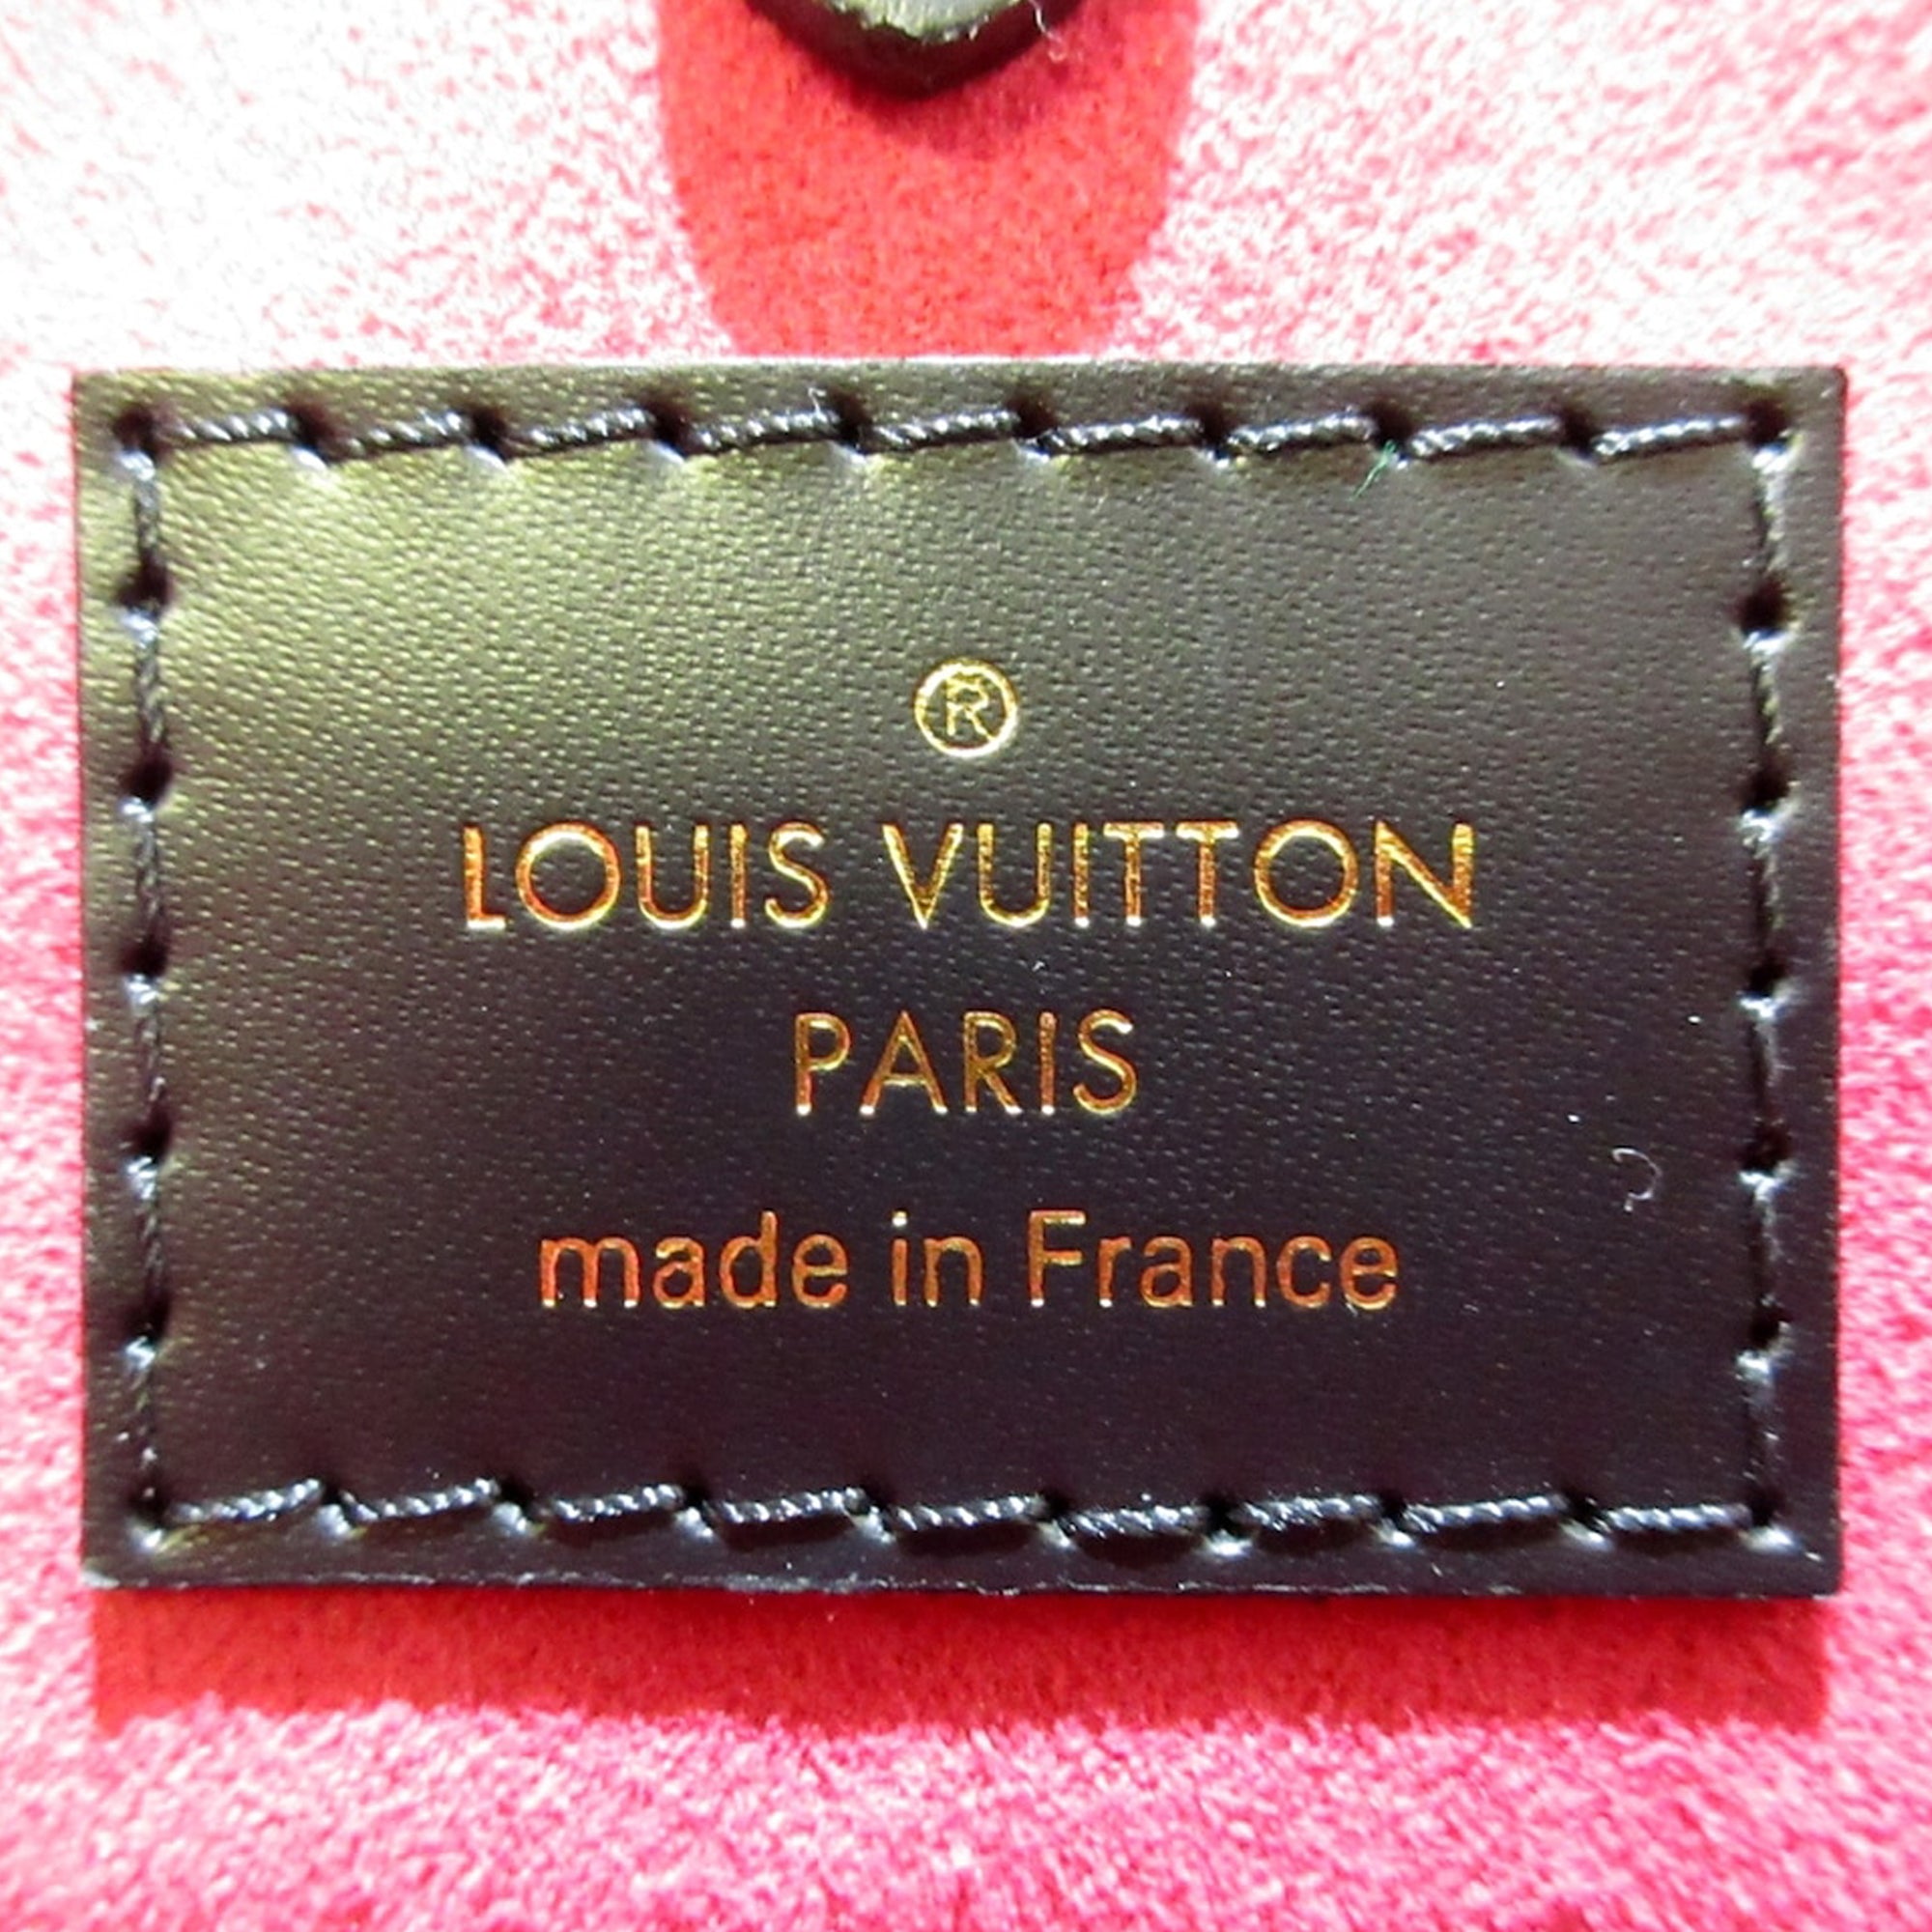 Louis+Vuitton+OnTheGo+Tote+MM+Black%2FBeige+Leather for sale online